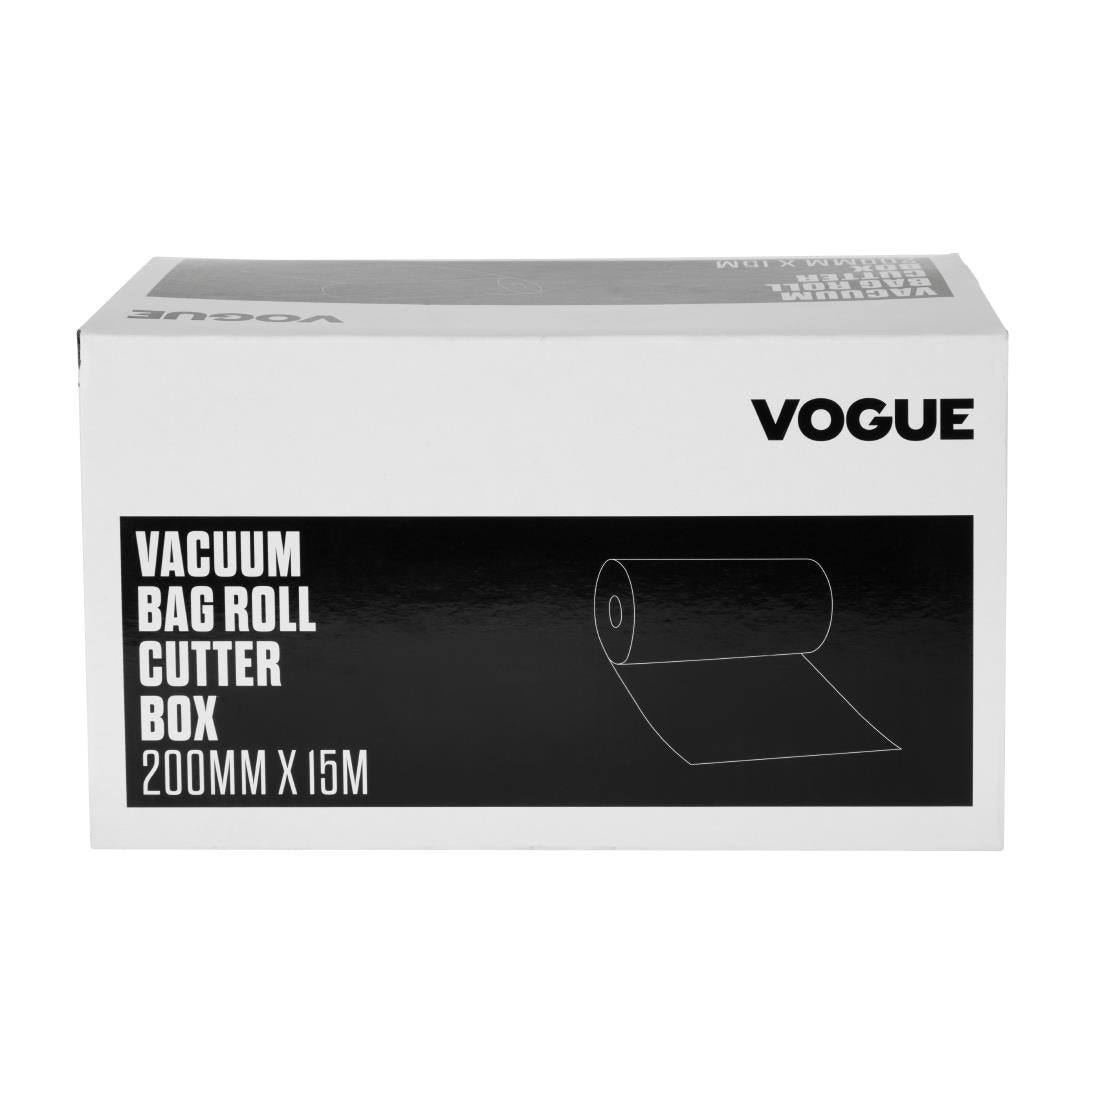 GF427 Vogue Vacuum Pack Roll with Cutter Box 15m JD Catering Equipment Solutions Ltd